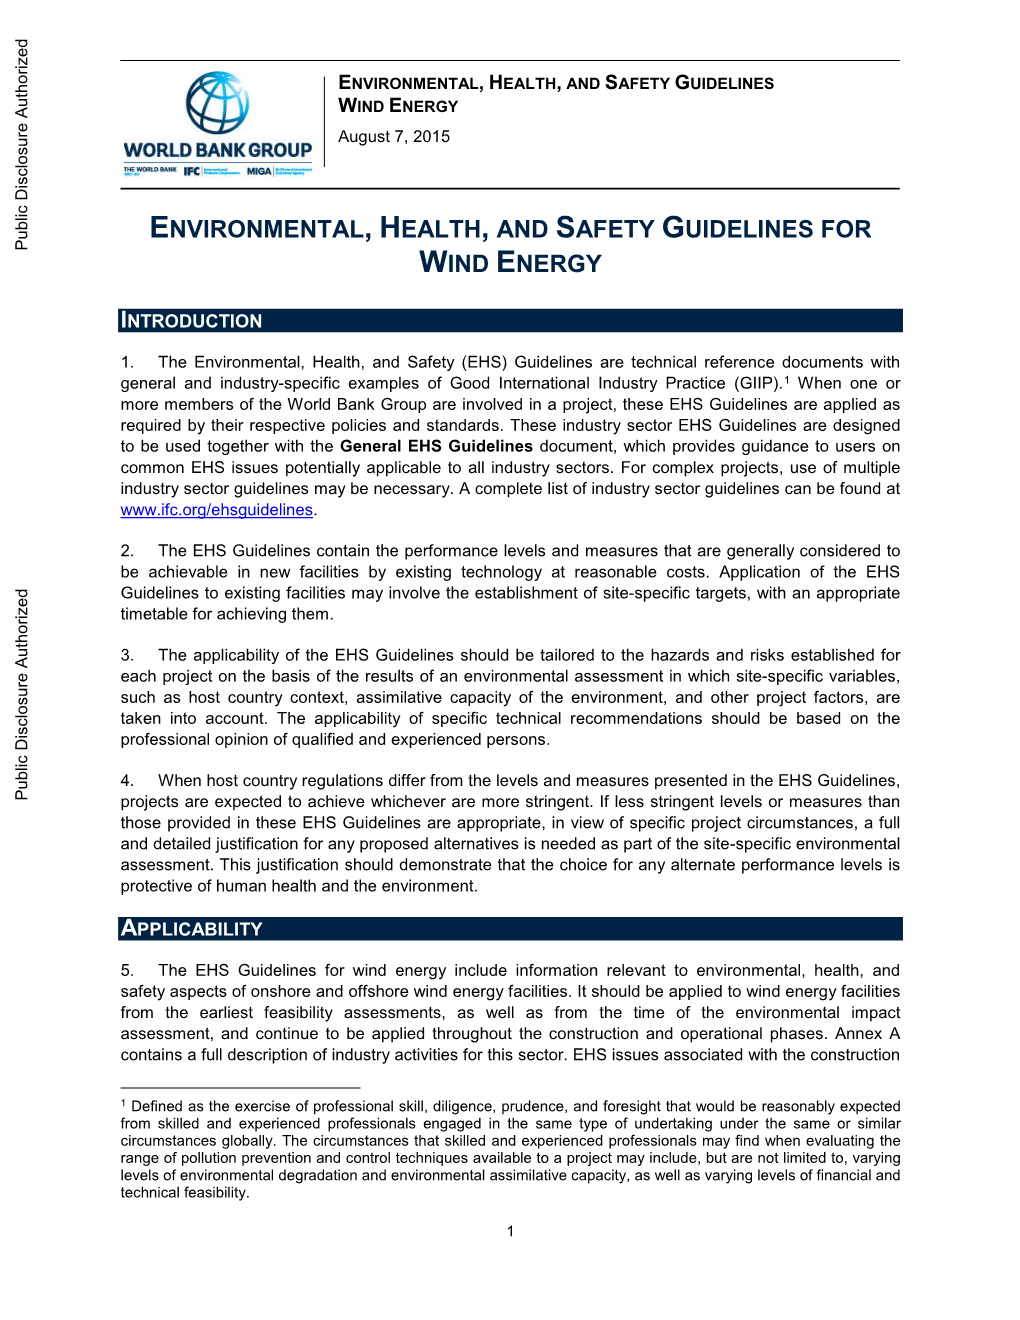 Environmental, Health, and Safety Guidelines for Wind Energy